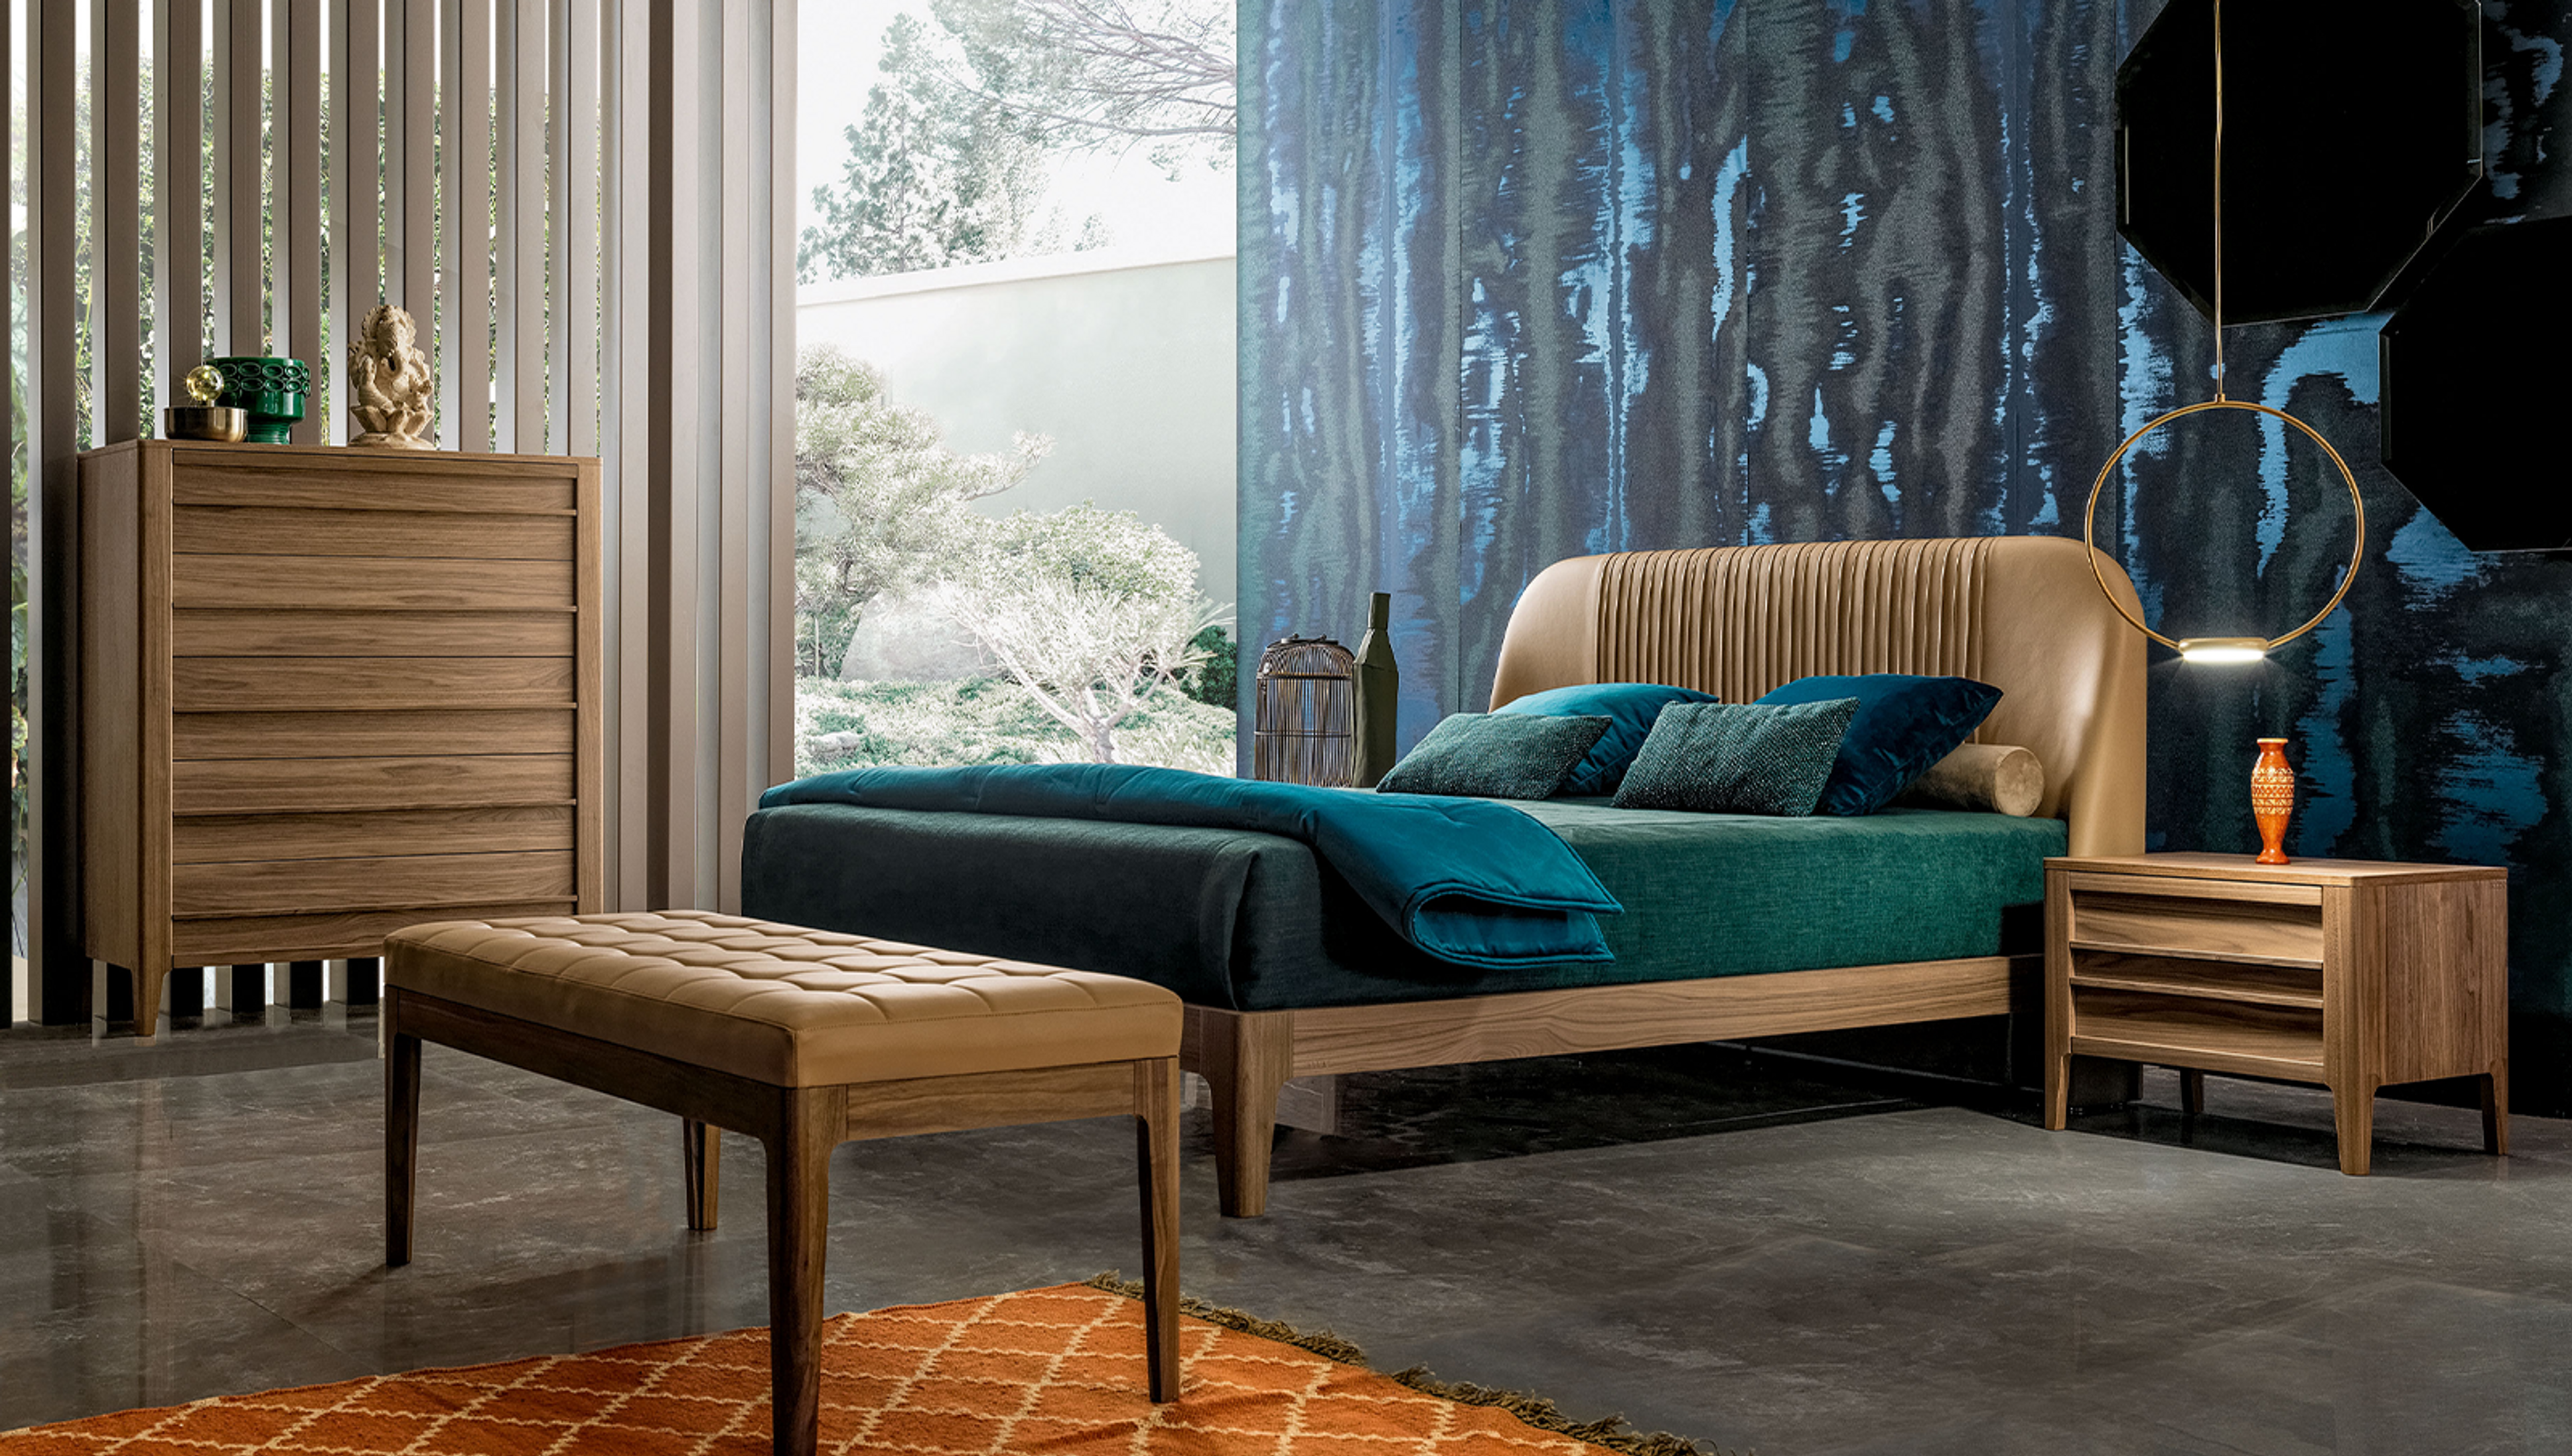 Interiors by Modo10, featuring their Alba bed, made from Canaletto wood and endowed with an upholstered leather panel